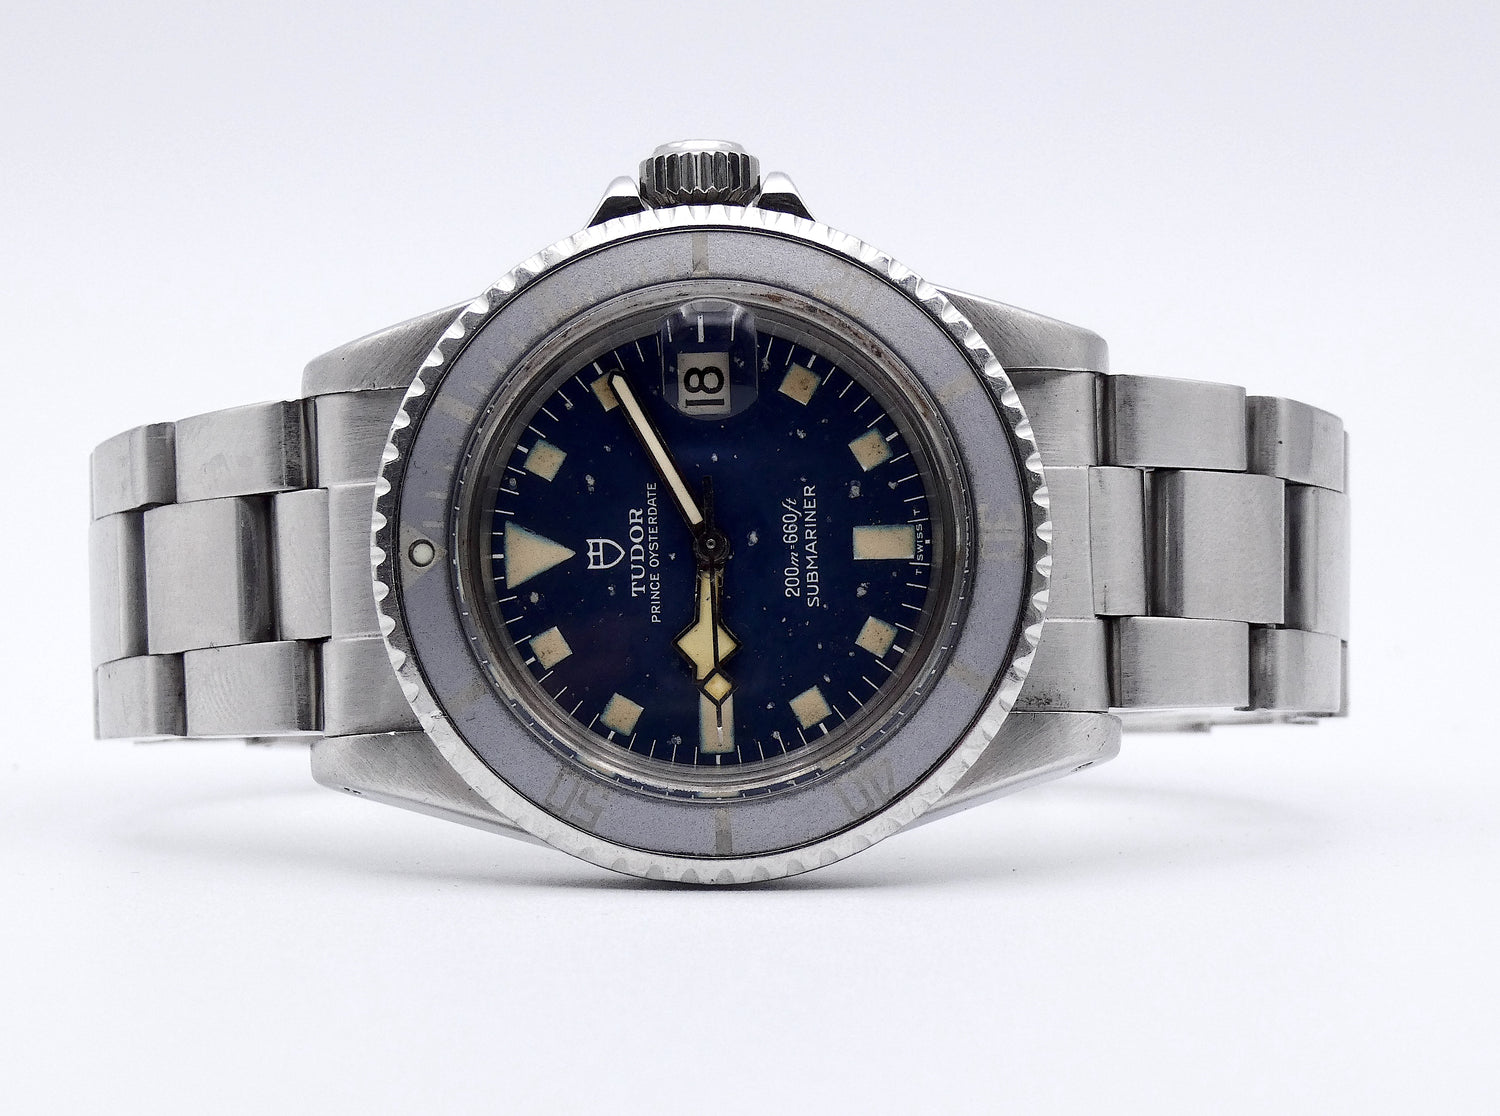 SOLD Submariner Snowflake Blue 1976 / Ghost bezel / Snowflake dial